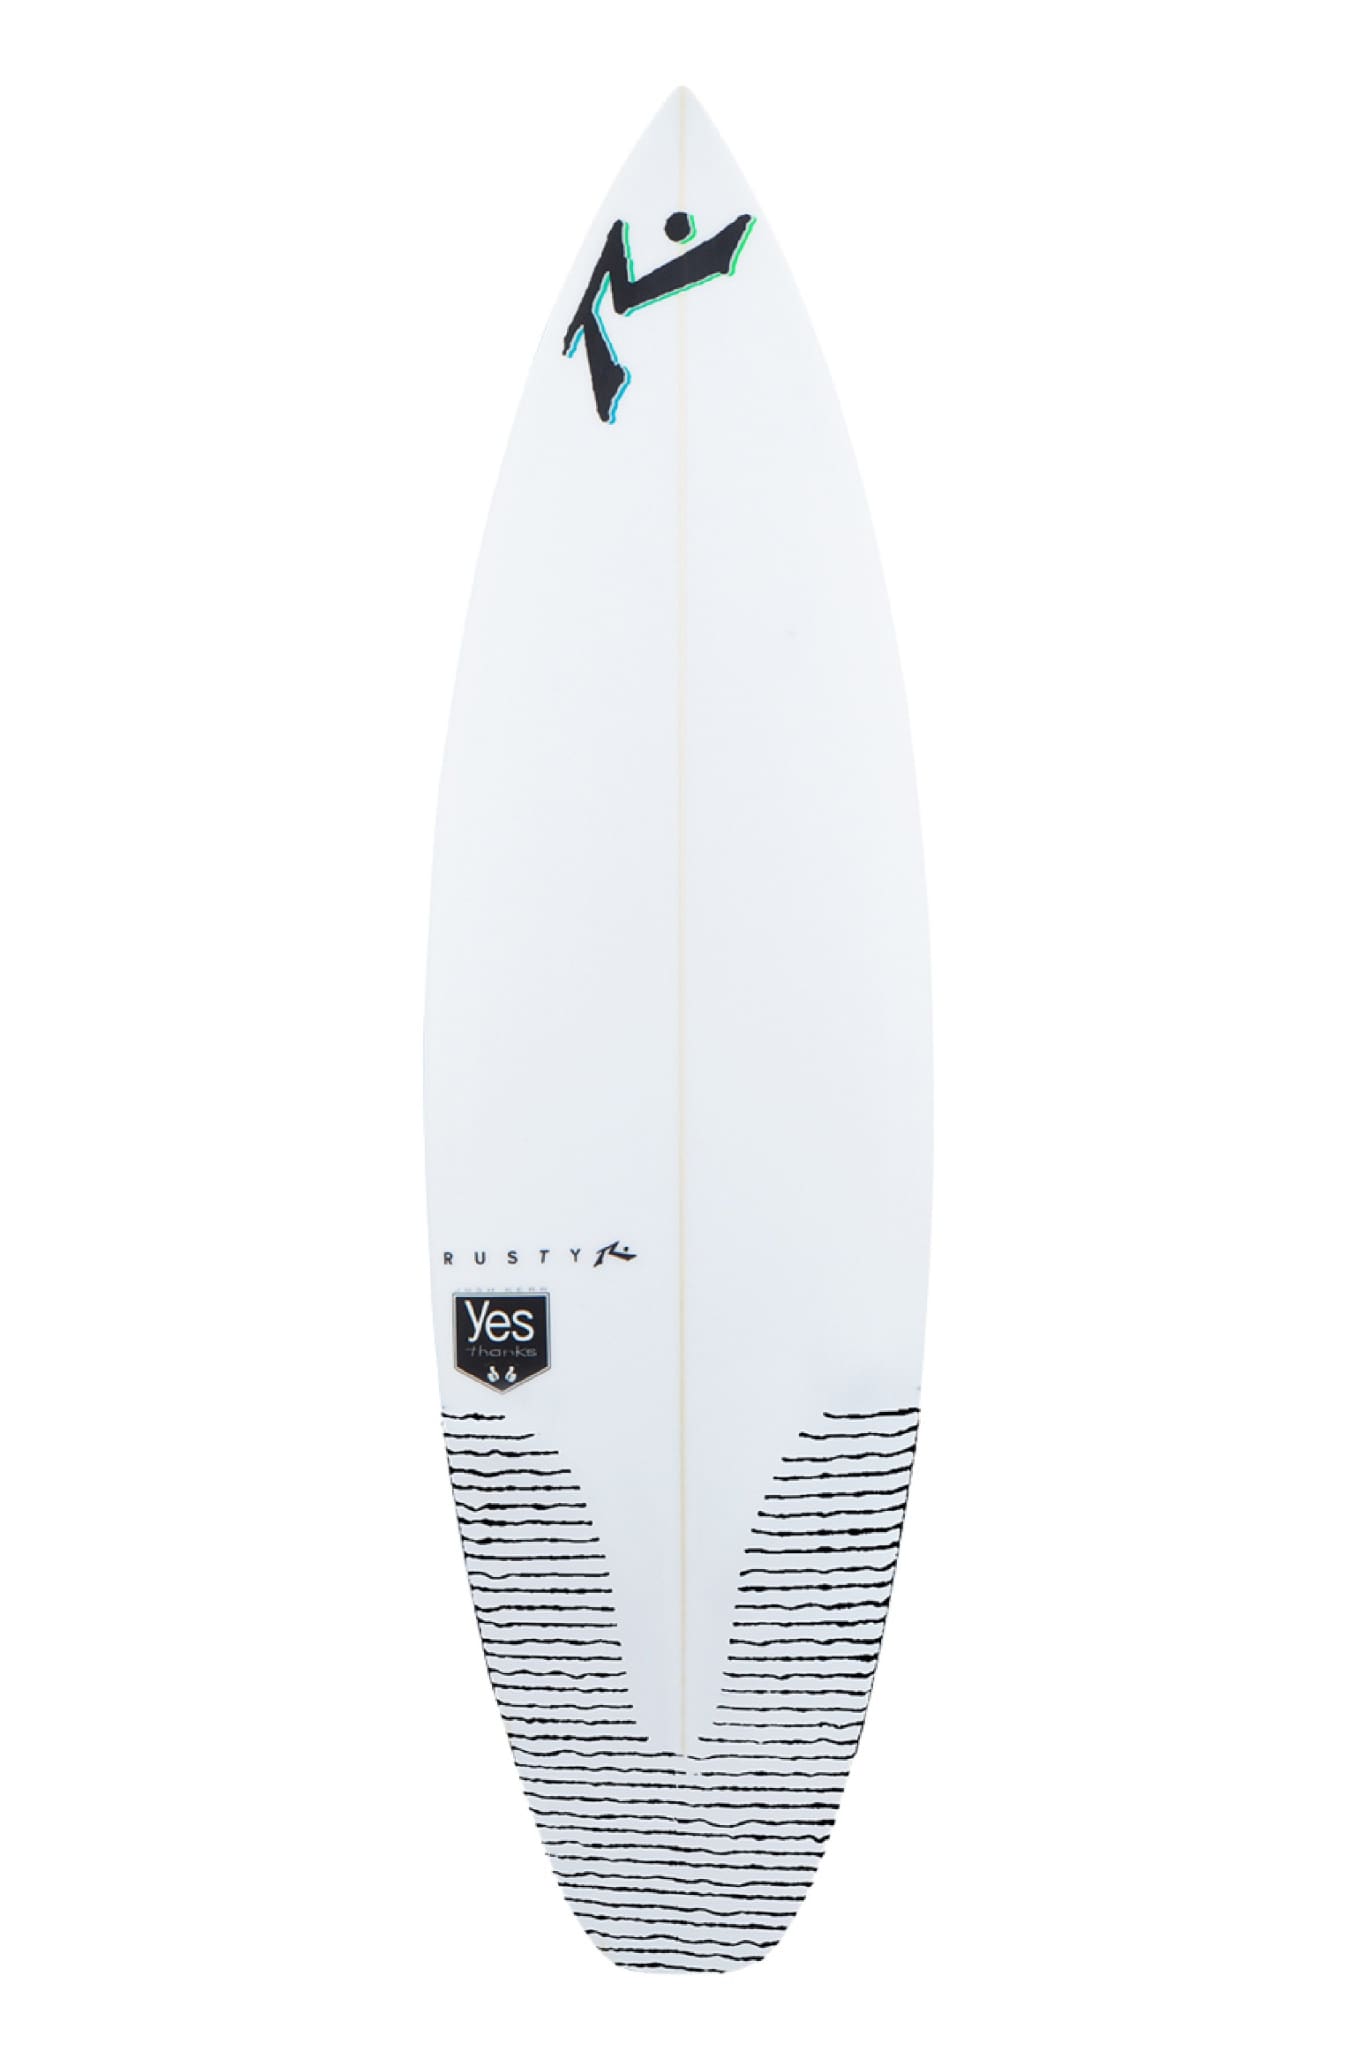 Yes Thanks | Surfboards-Rusty Surfboards South Africa